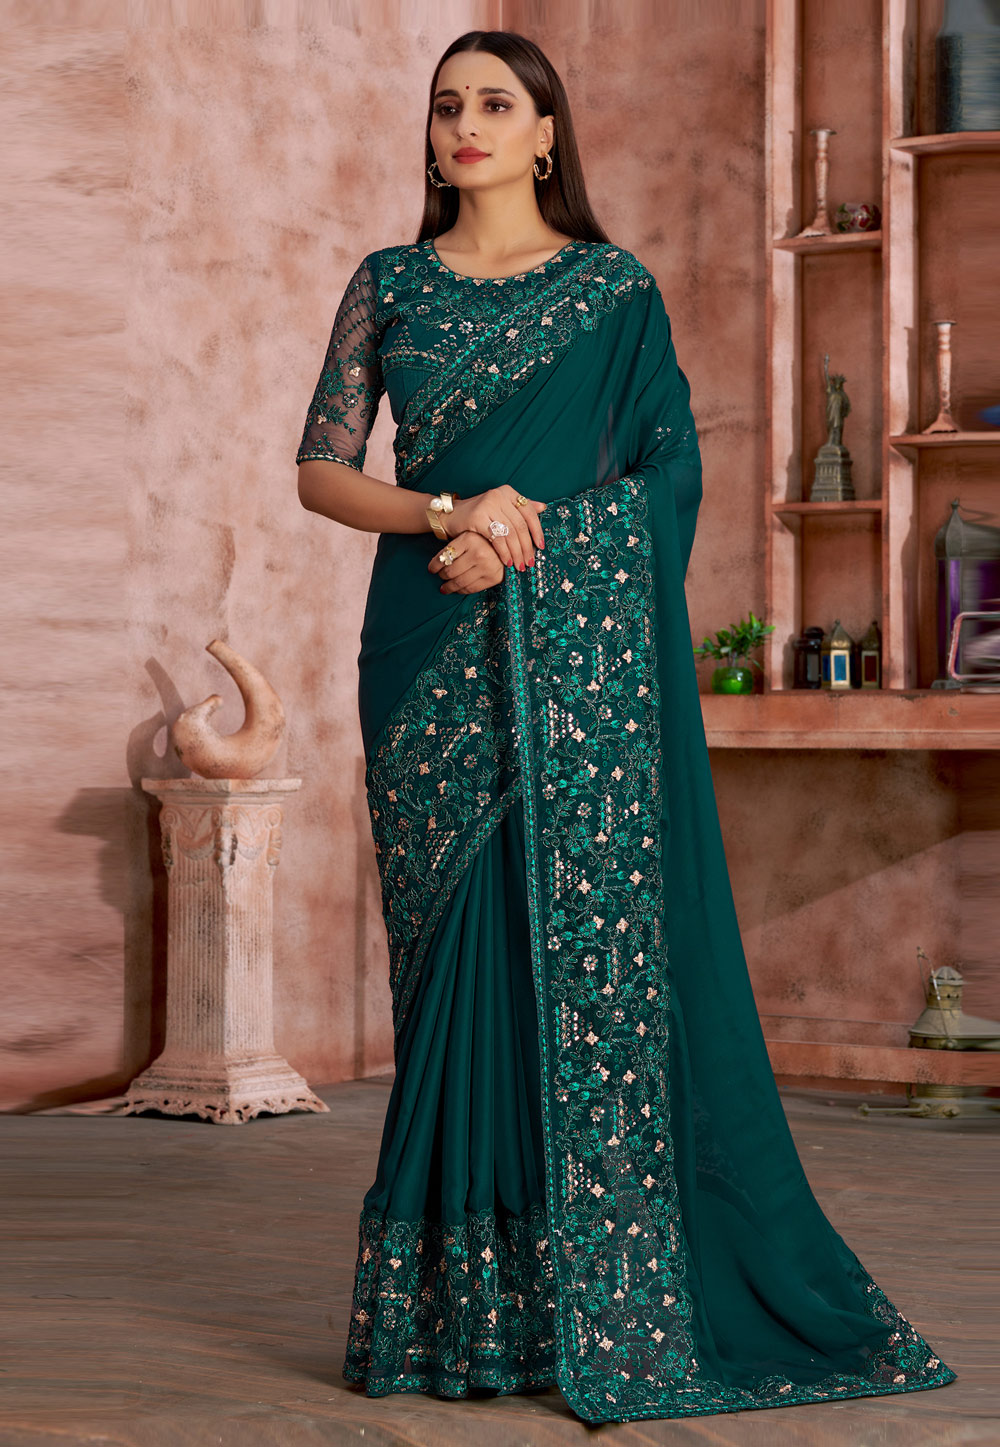 Teal Satin Georgette Saree With Blouse 245528